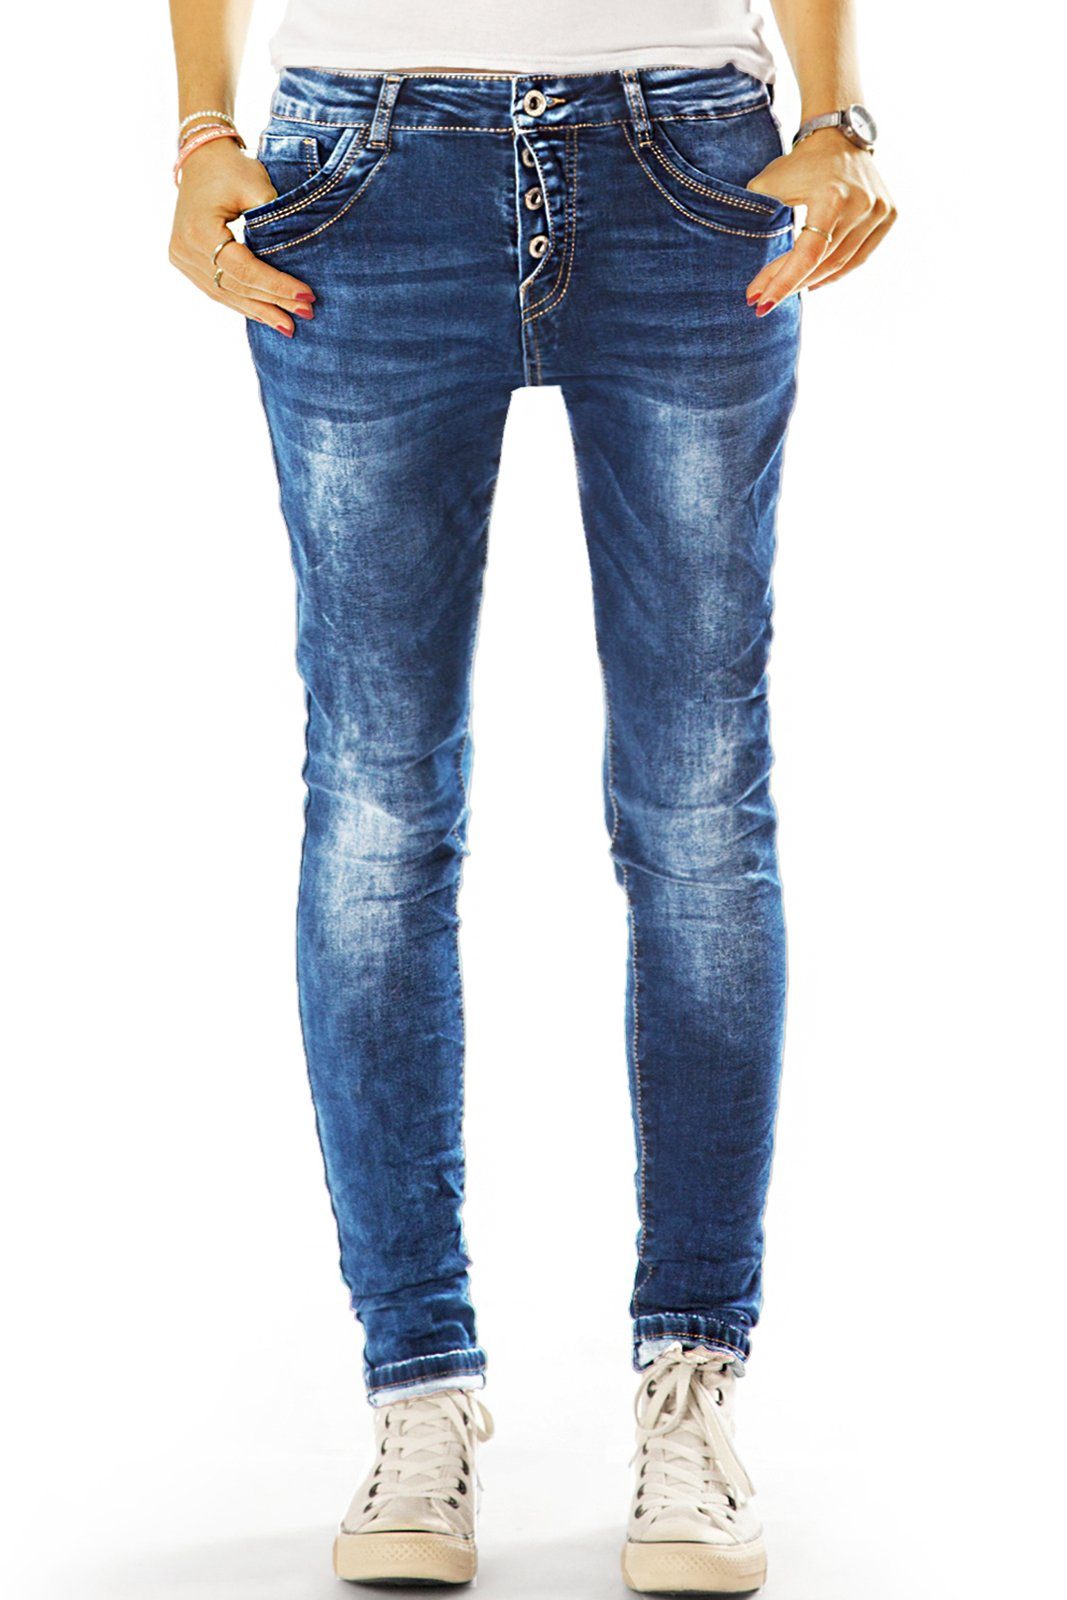 5-Pocket-Style Fit - Slim Hose Look Stretch-Anteil, Slim-fit-Jeans Fit Relaxed be im Hüftjeans j4g-1 styled Damen - mit